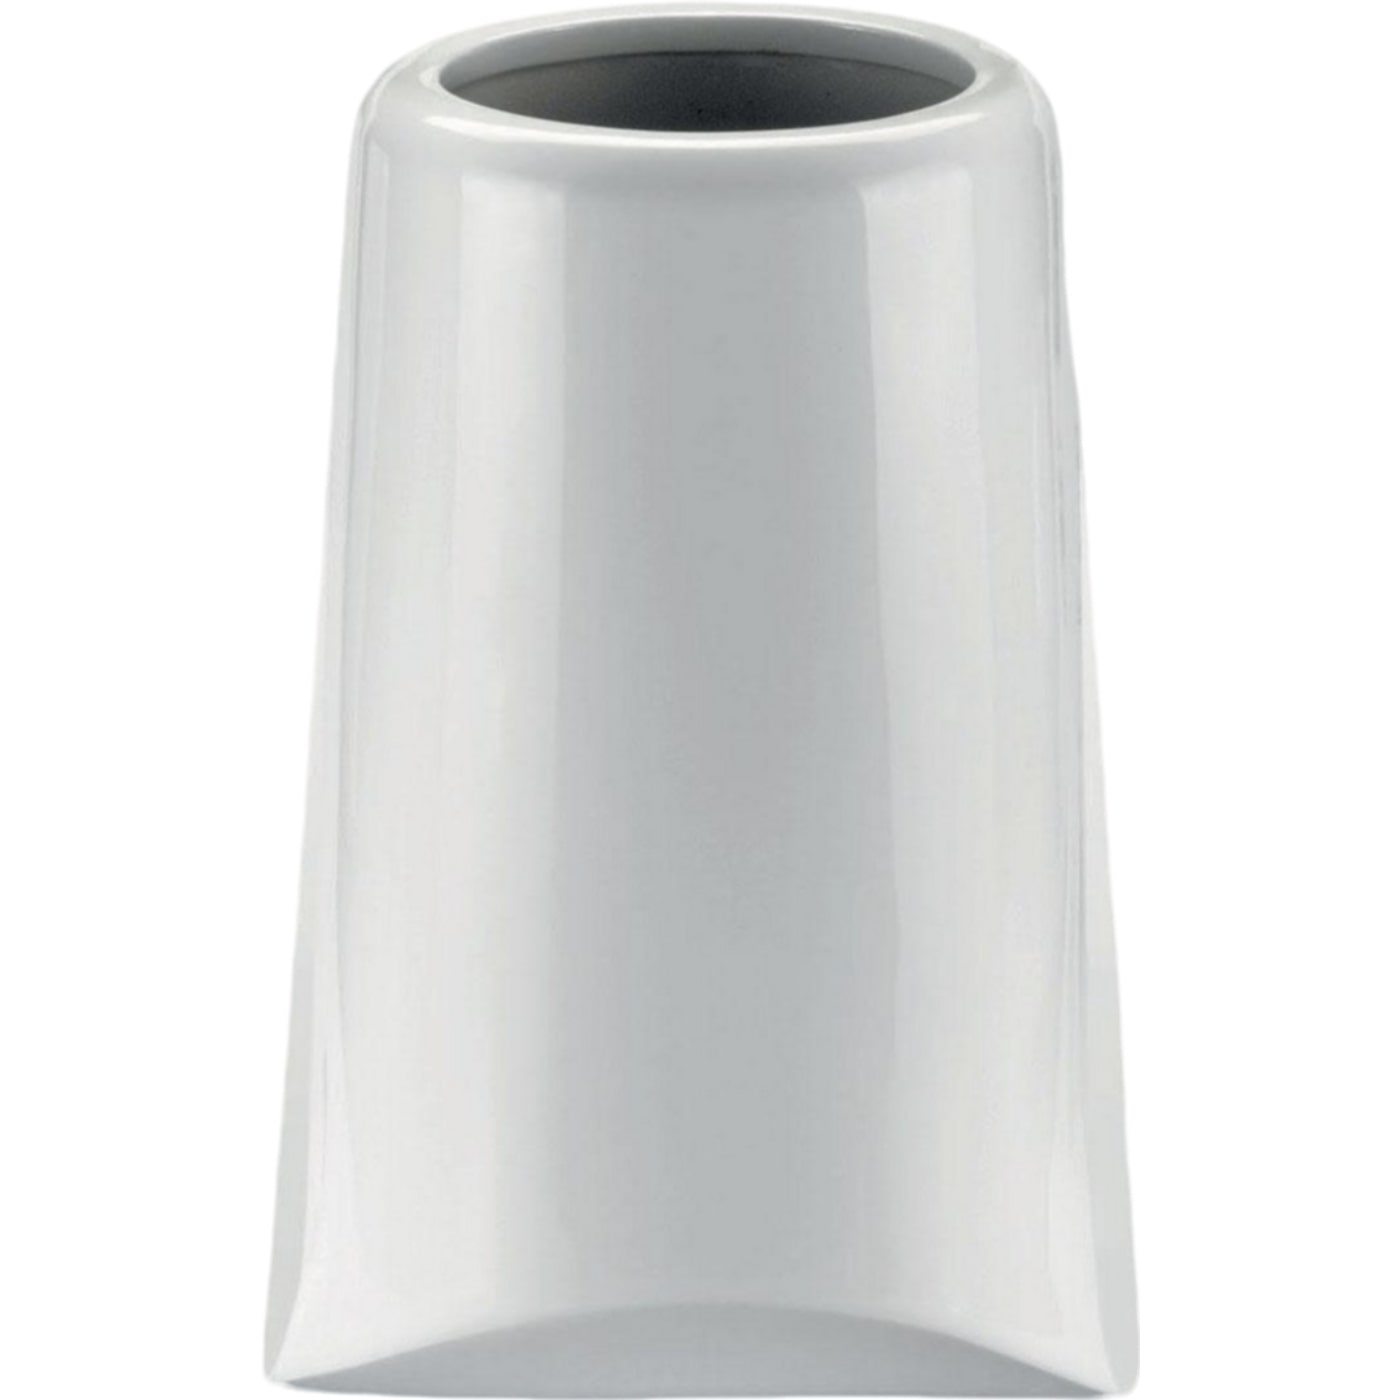 Grave vase Giselle 21x13cm - 8.3x5.1in In white porcelain, wall attached GI128P